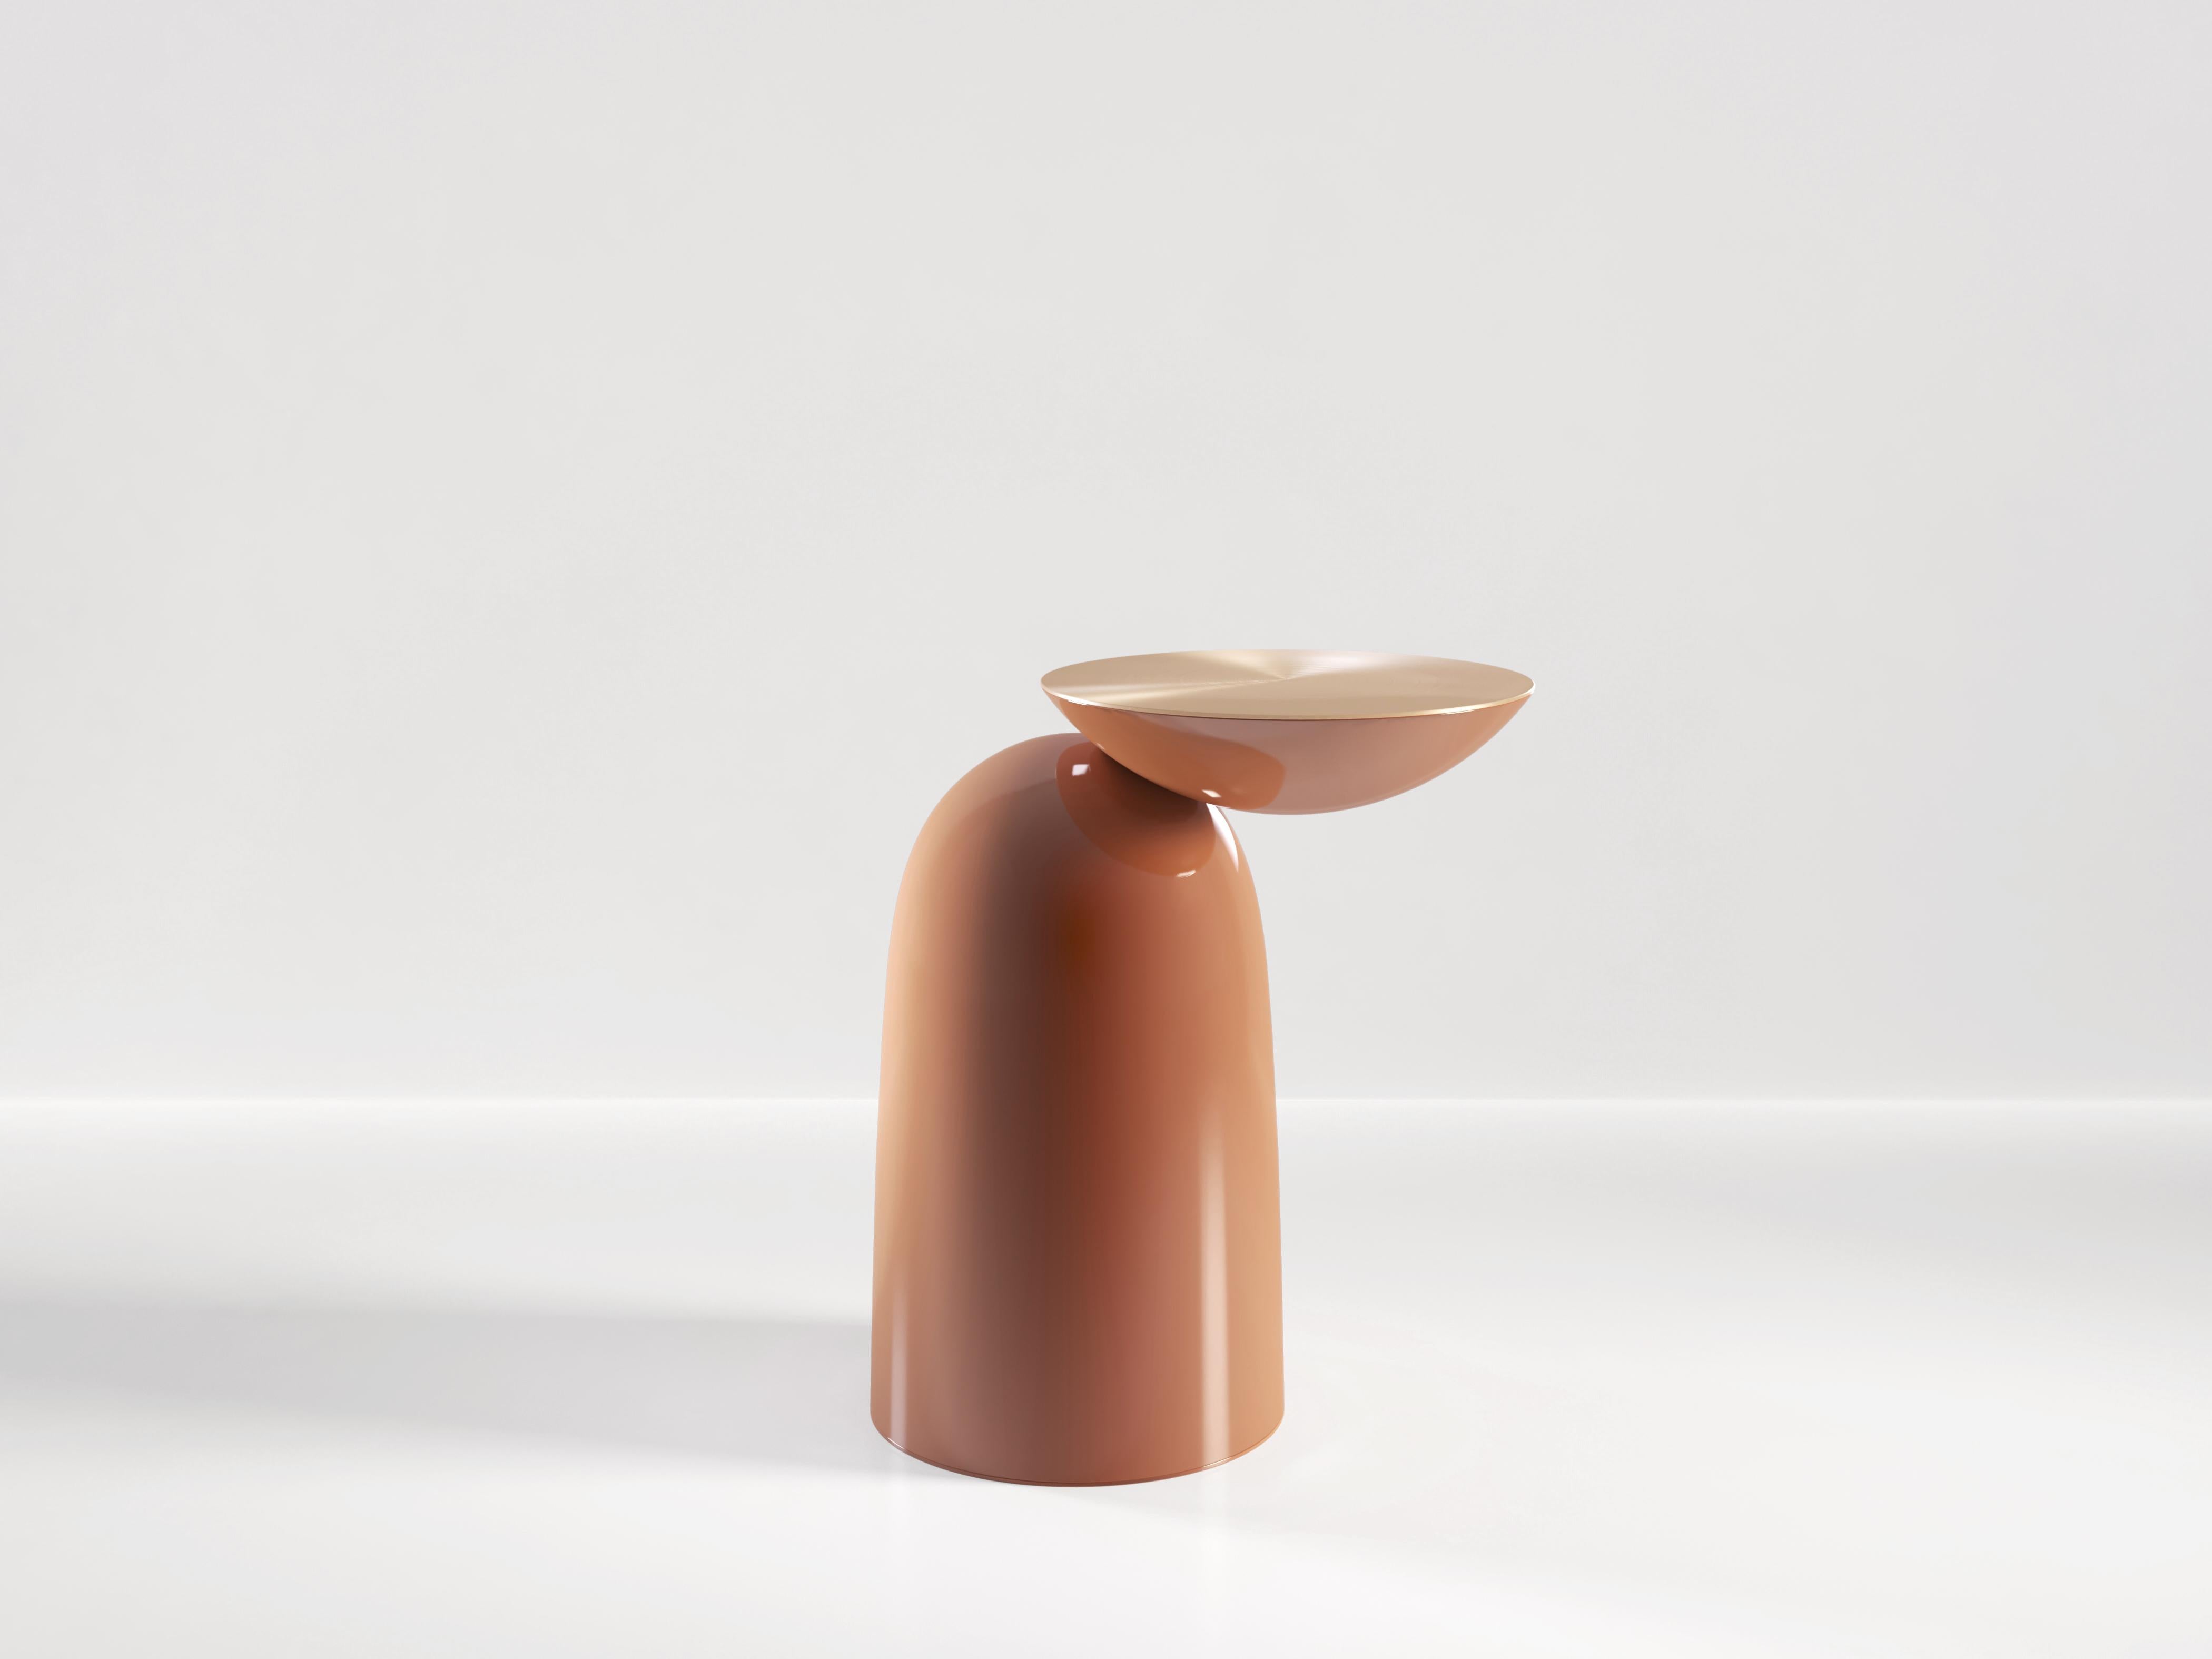 Pingu is a playful addition to any room, offering up a place for a drink or an ashtray beside your chair. An inverted dome is supported by a soft-shaped base which it is barely touching. A metal top adds a touch of luxury. Pingu is available in any